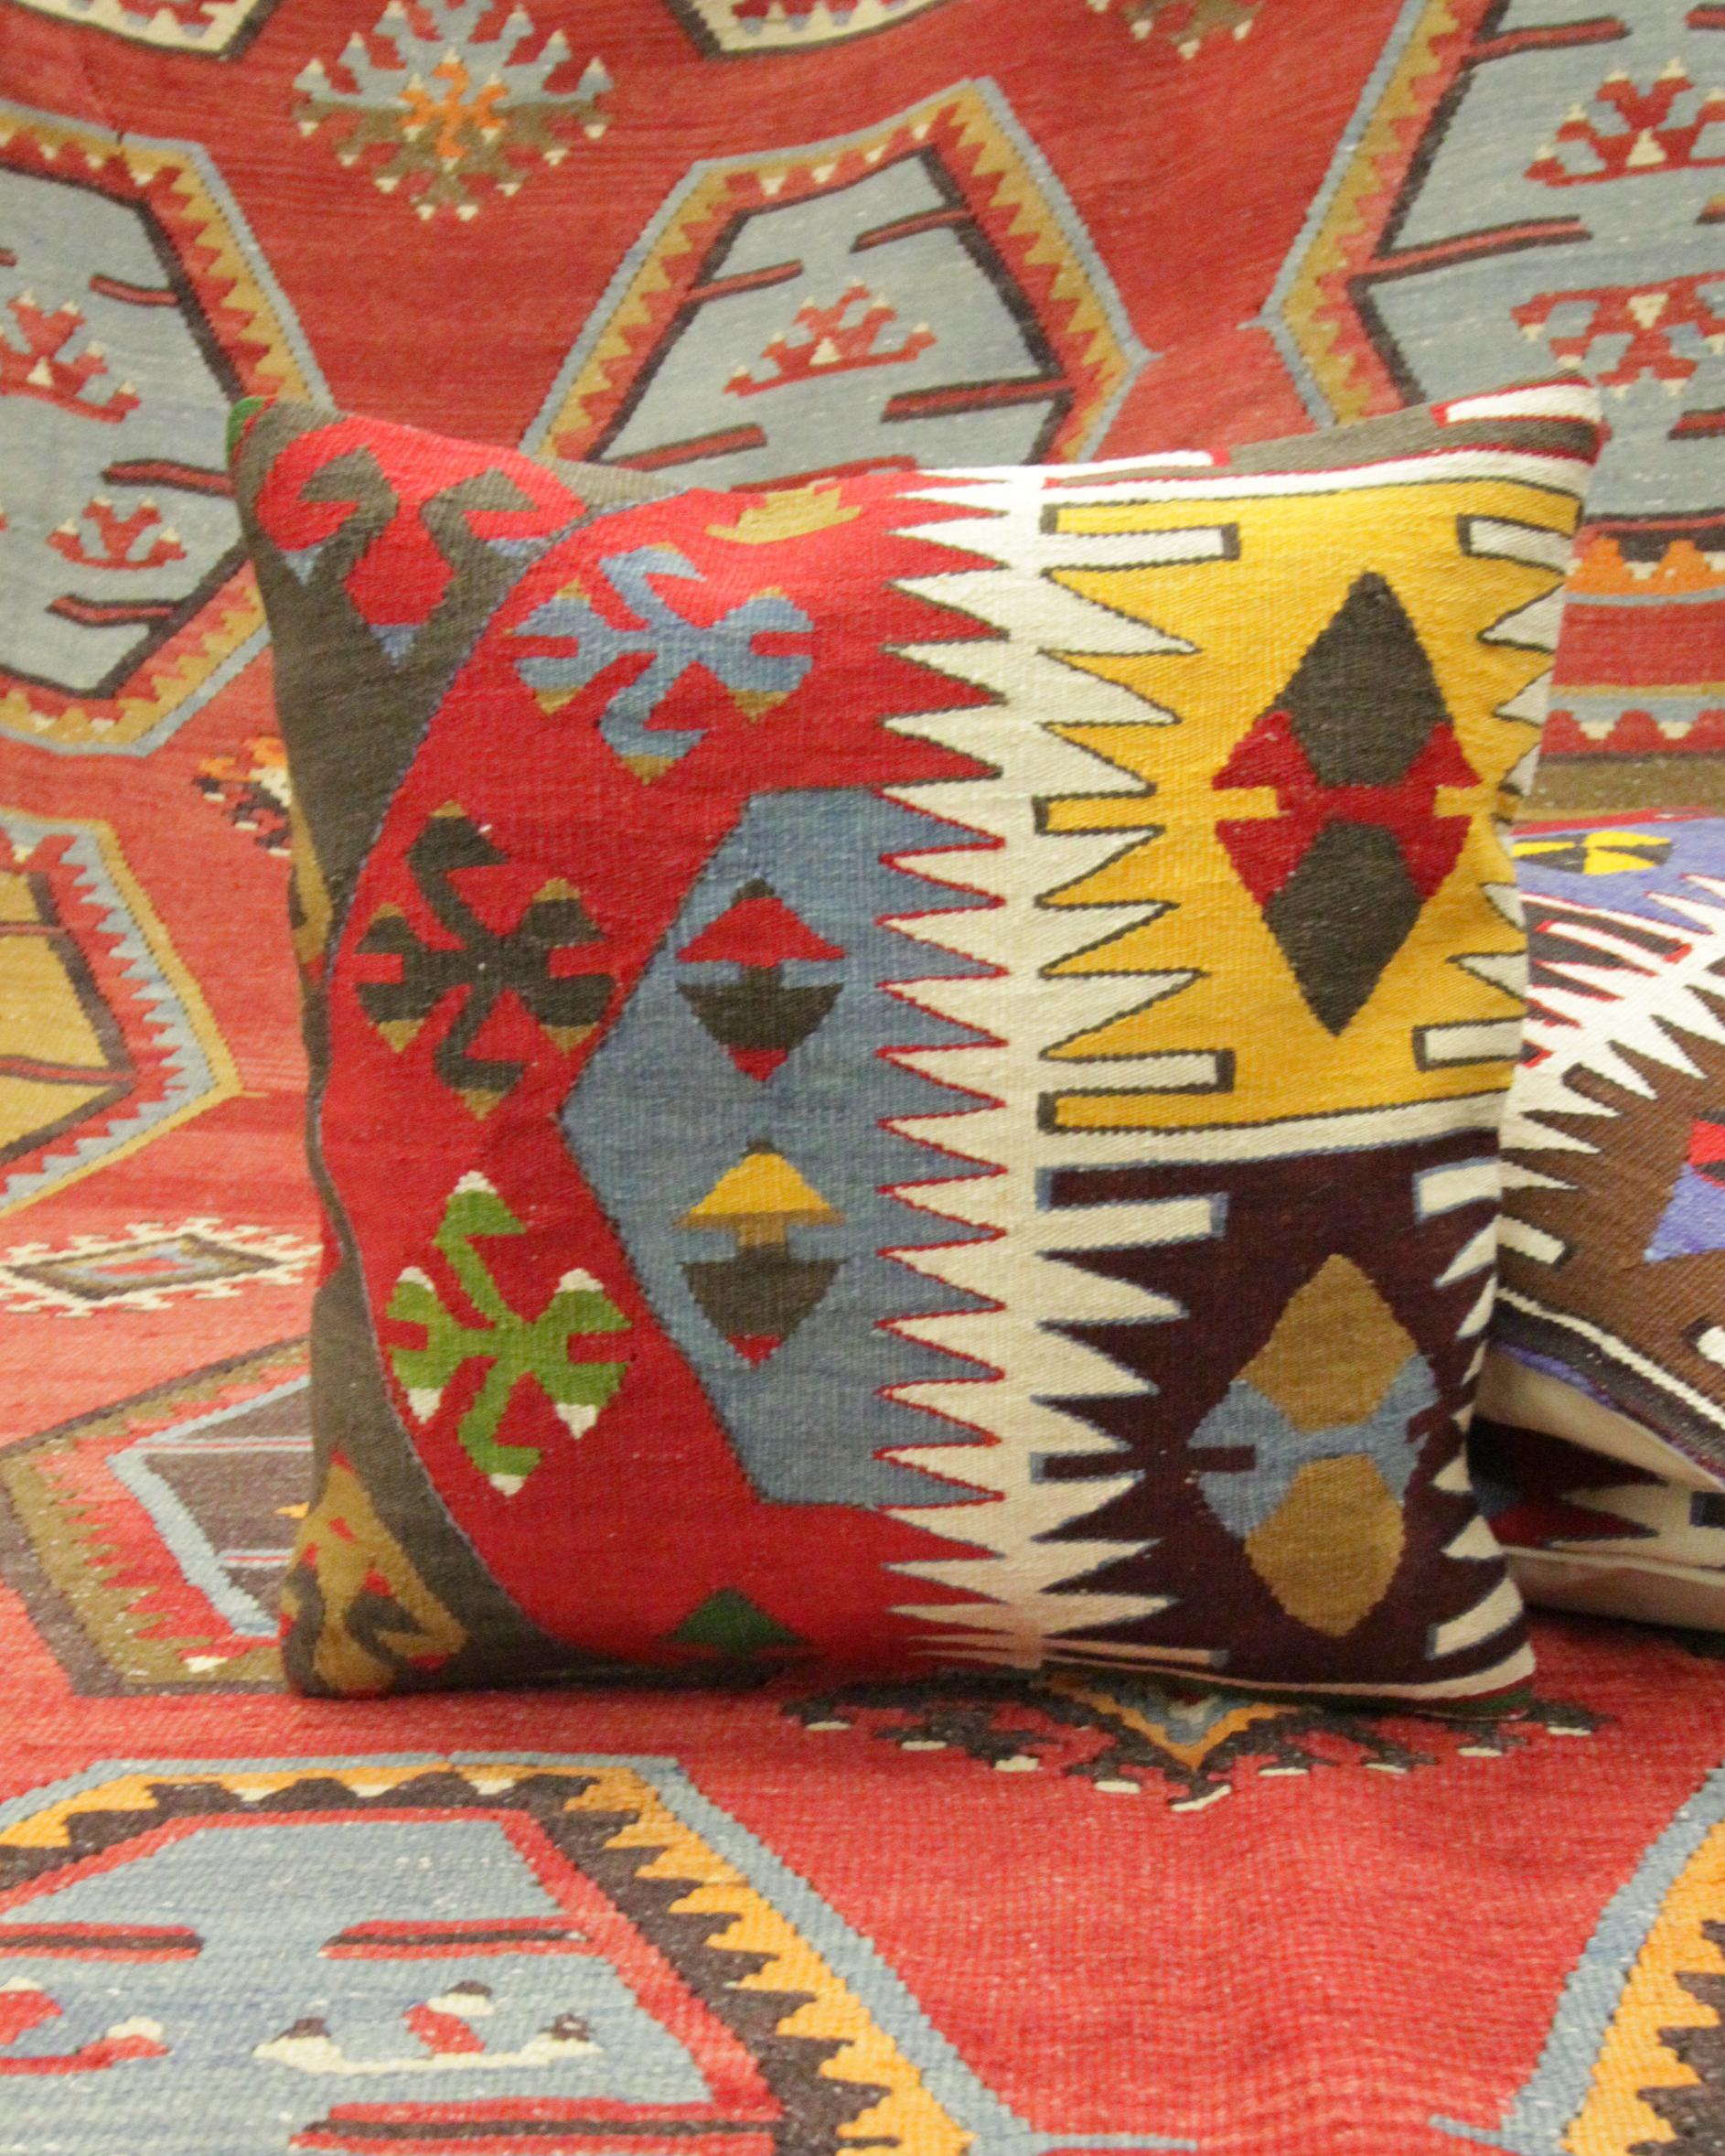 This unique geometric cushion cover is a modern handwoven Turkish Kilim cushion cover. The design features traditional geometric designs woven in blue, red, cream and green. The traditional design and bold primary colours featured in this scatter